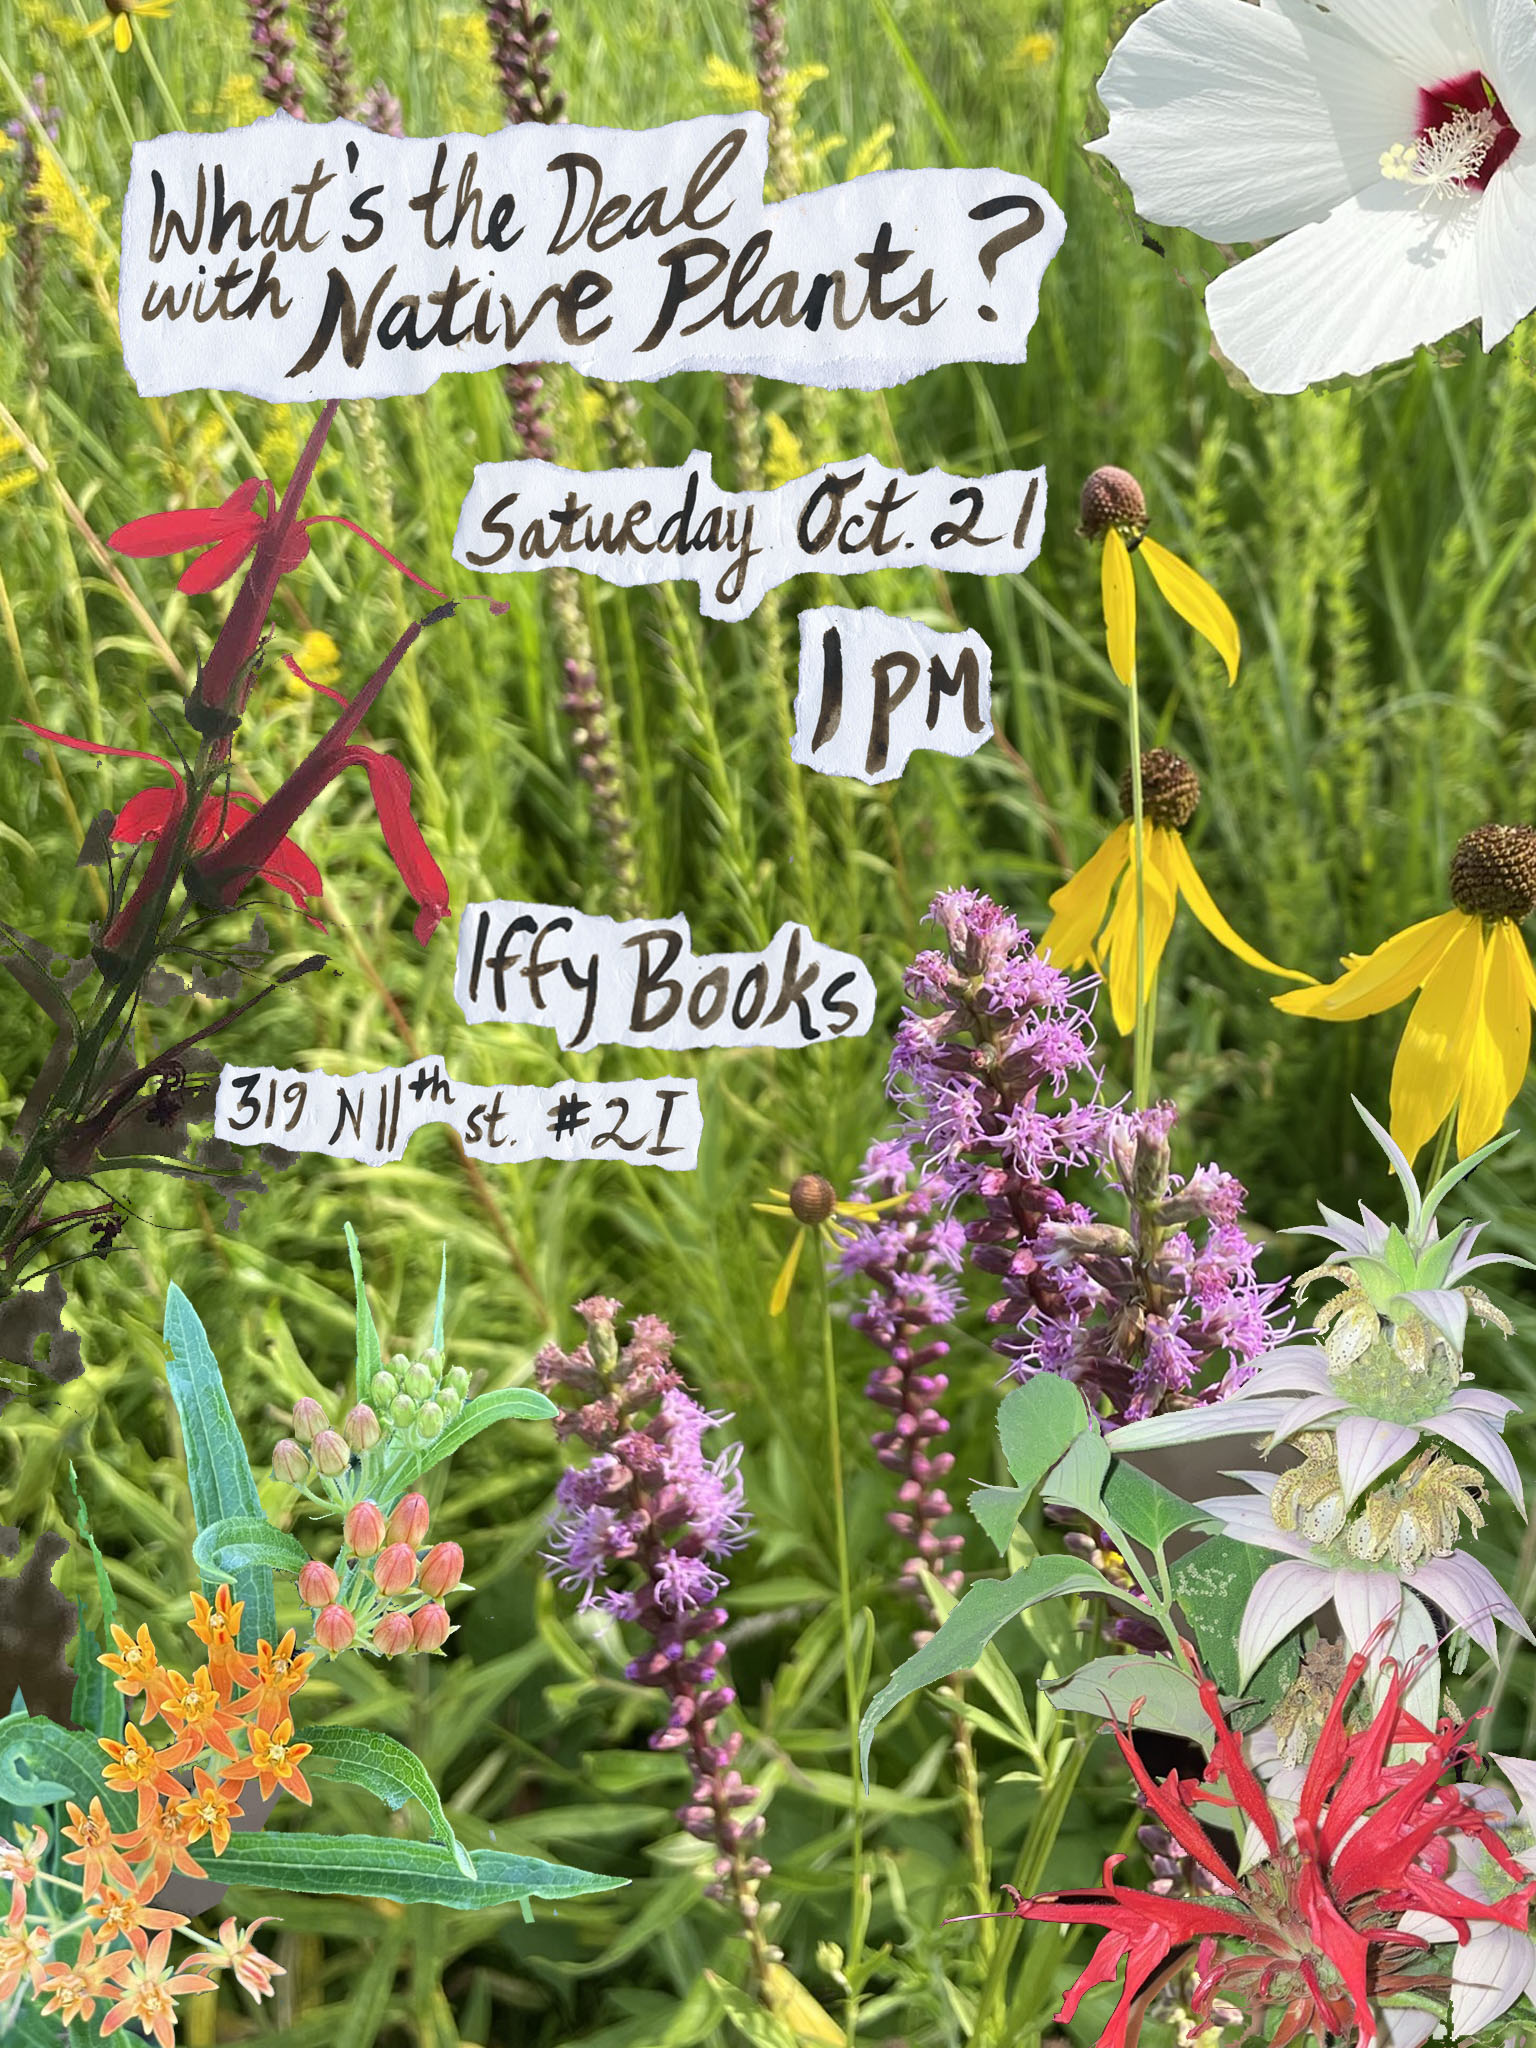 Flyer with a collage of native flowers and the following text handwritten using black walnut ink: What's the Deal with Native Plants? / Saturday, Oct. 21 1 PM Iffy Books 319 N. 11th St. #2I